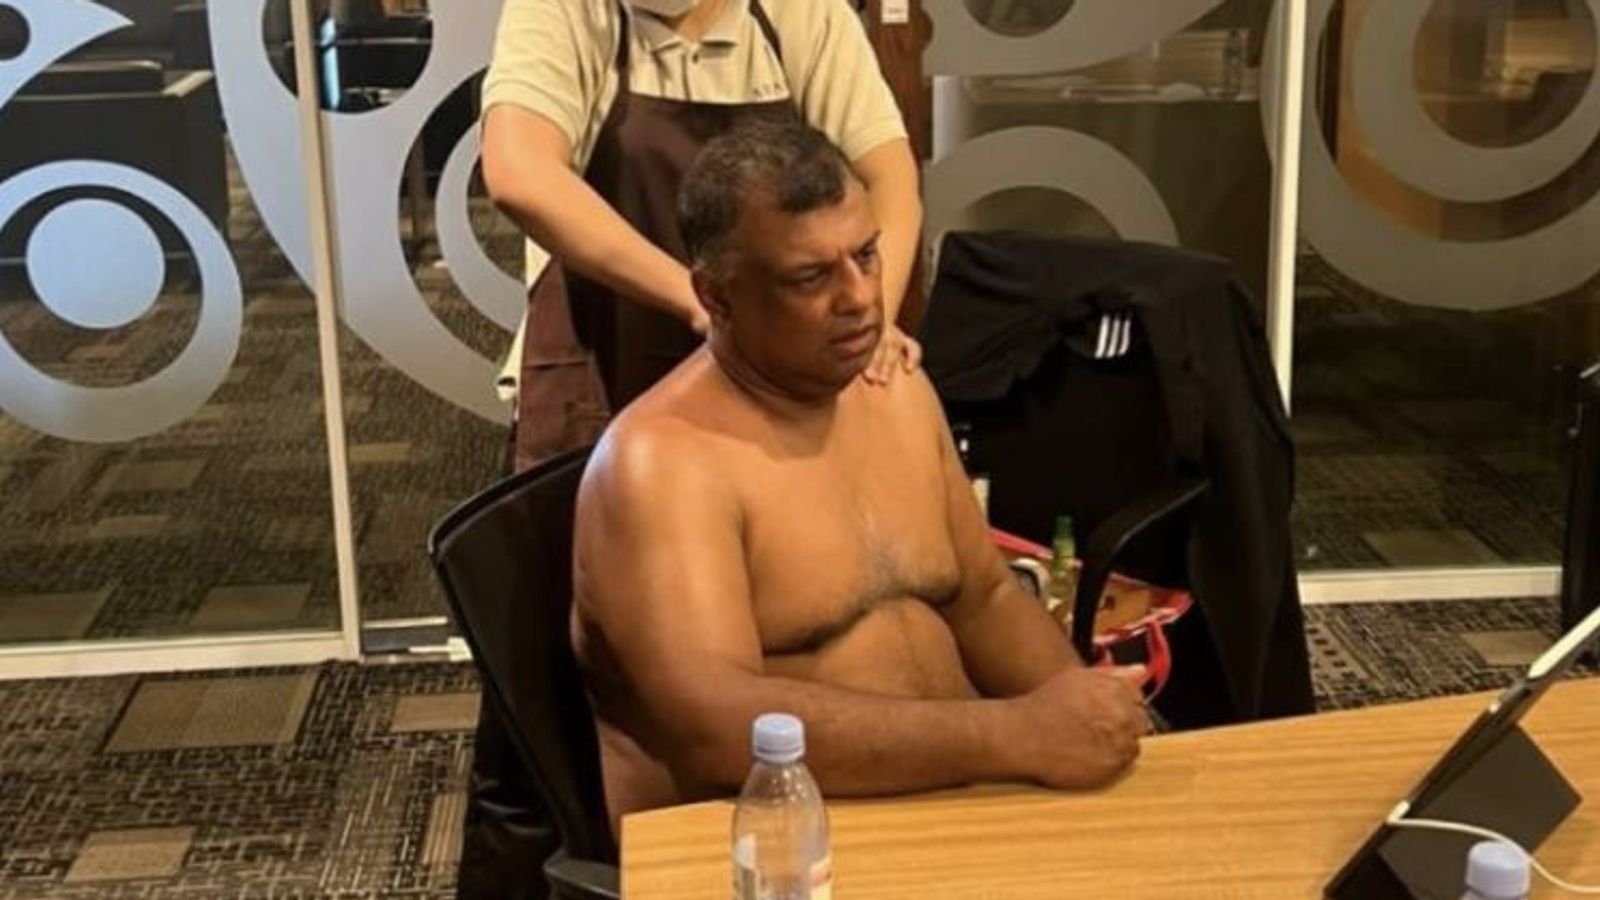 AirAsia boss Tony Fernandes criticised for posting topless photo of himself getting massage during meeting